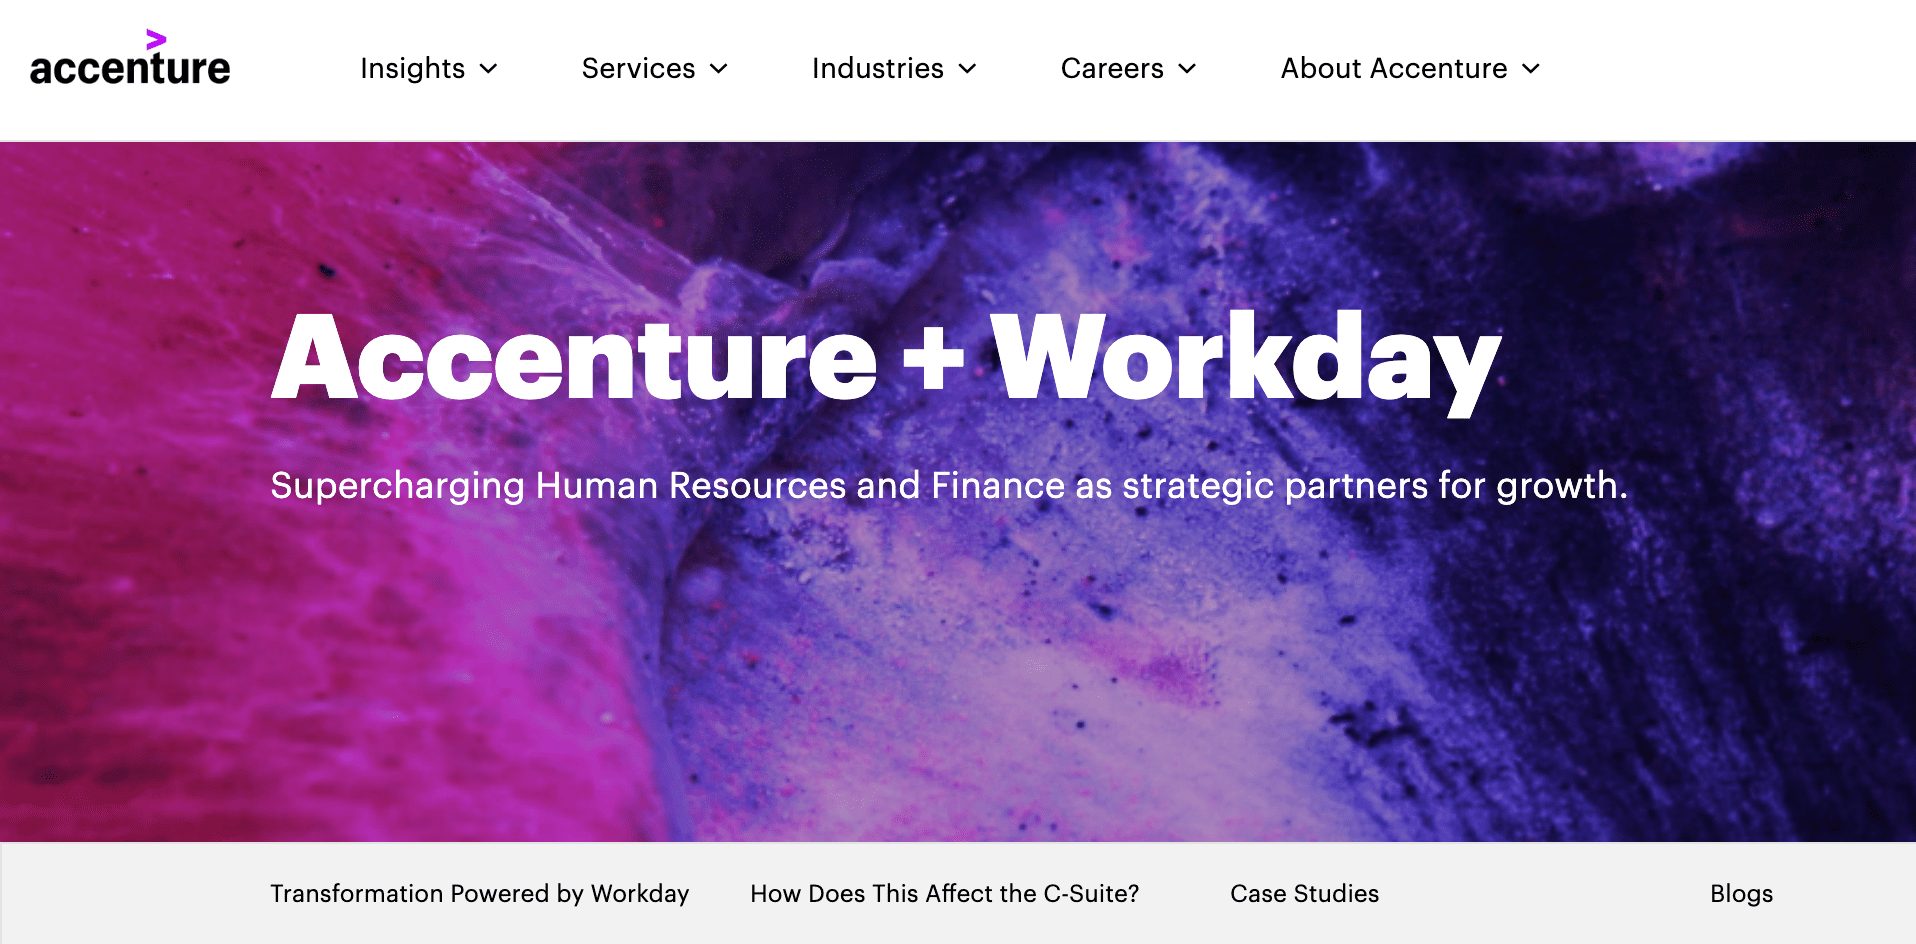 accenture + workday